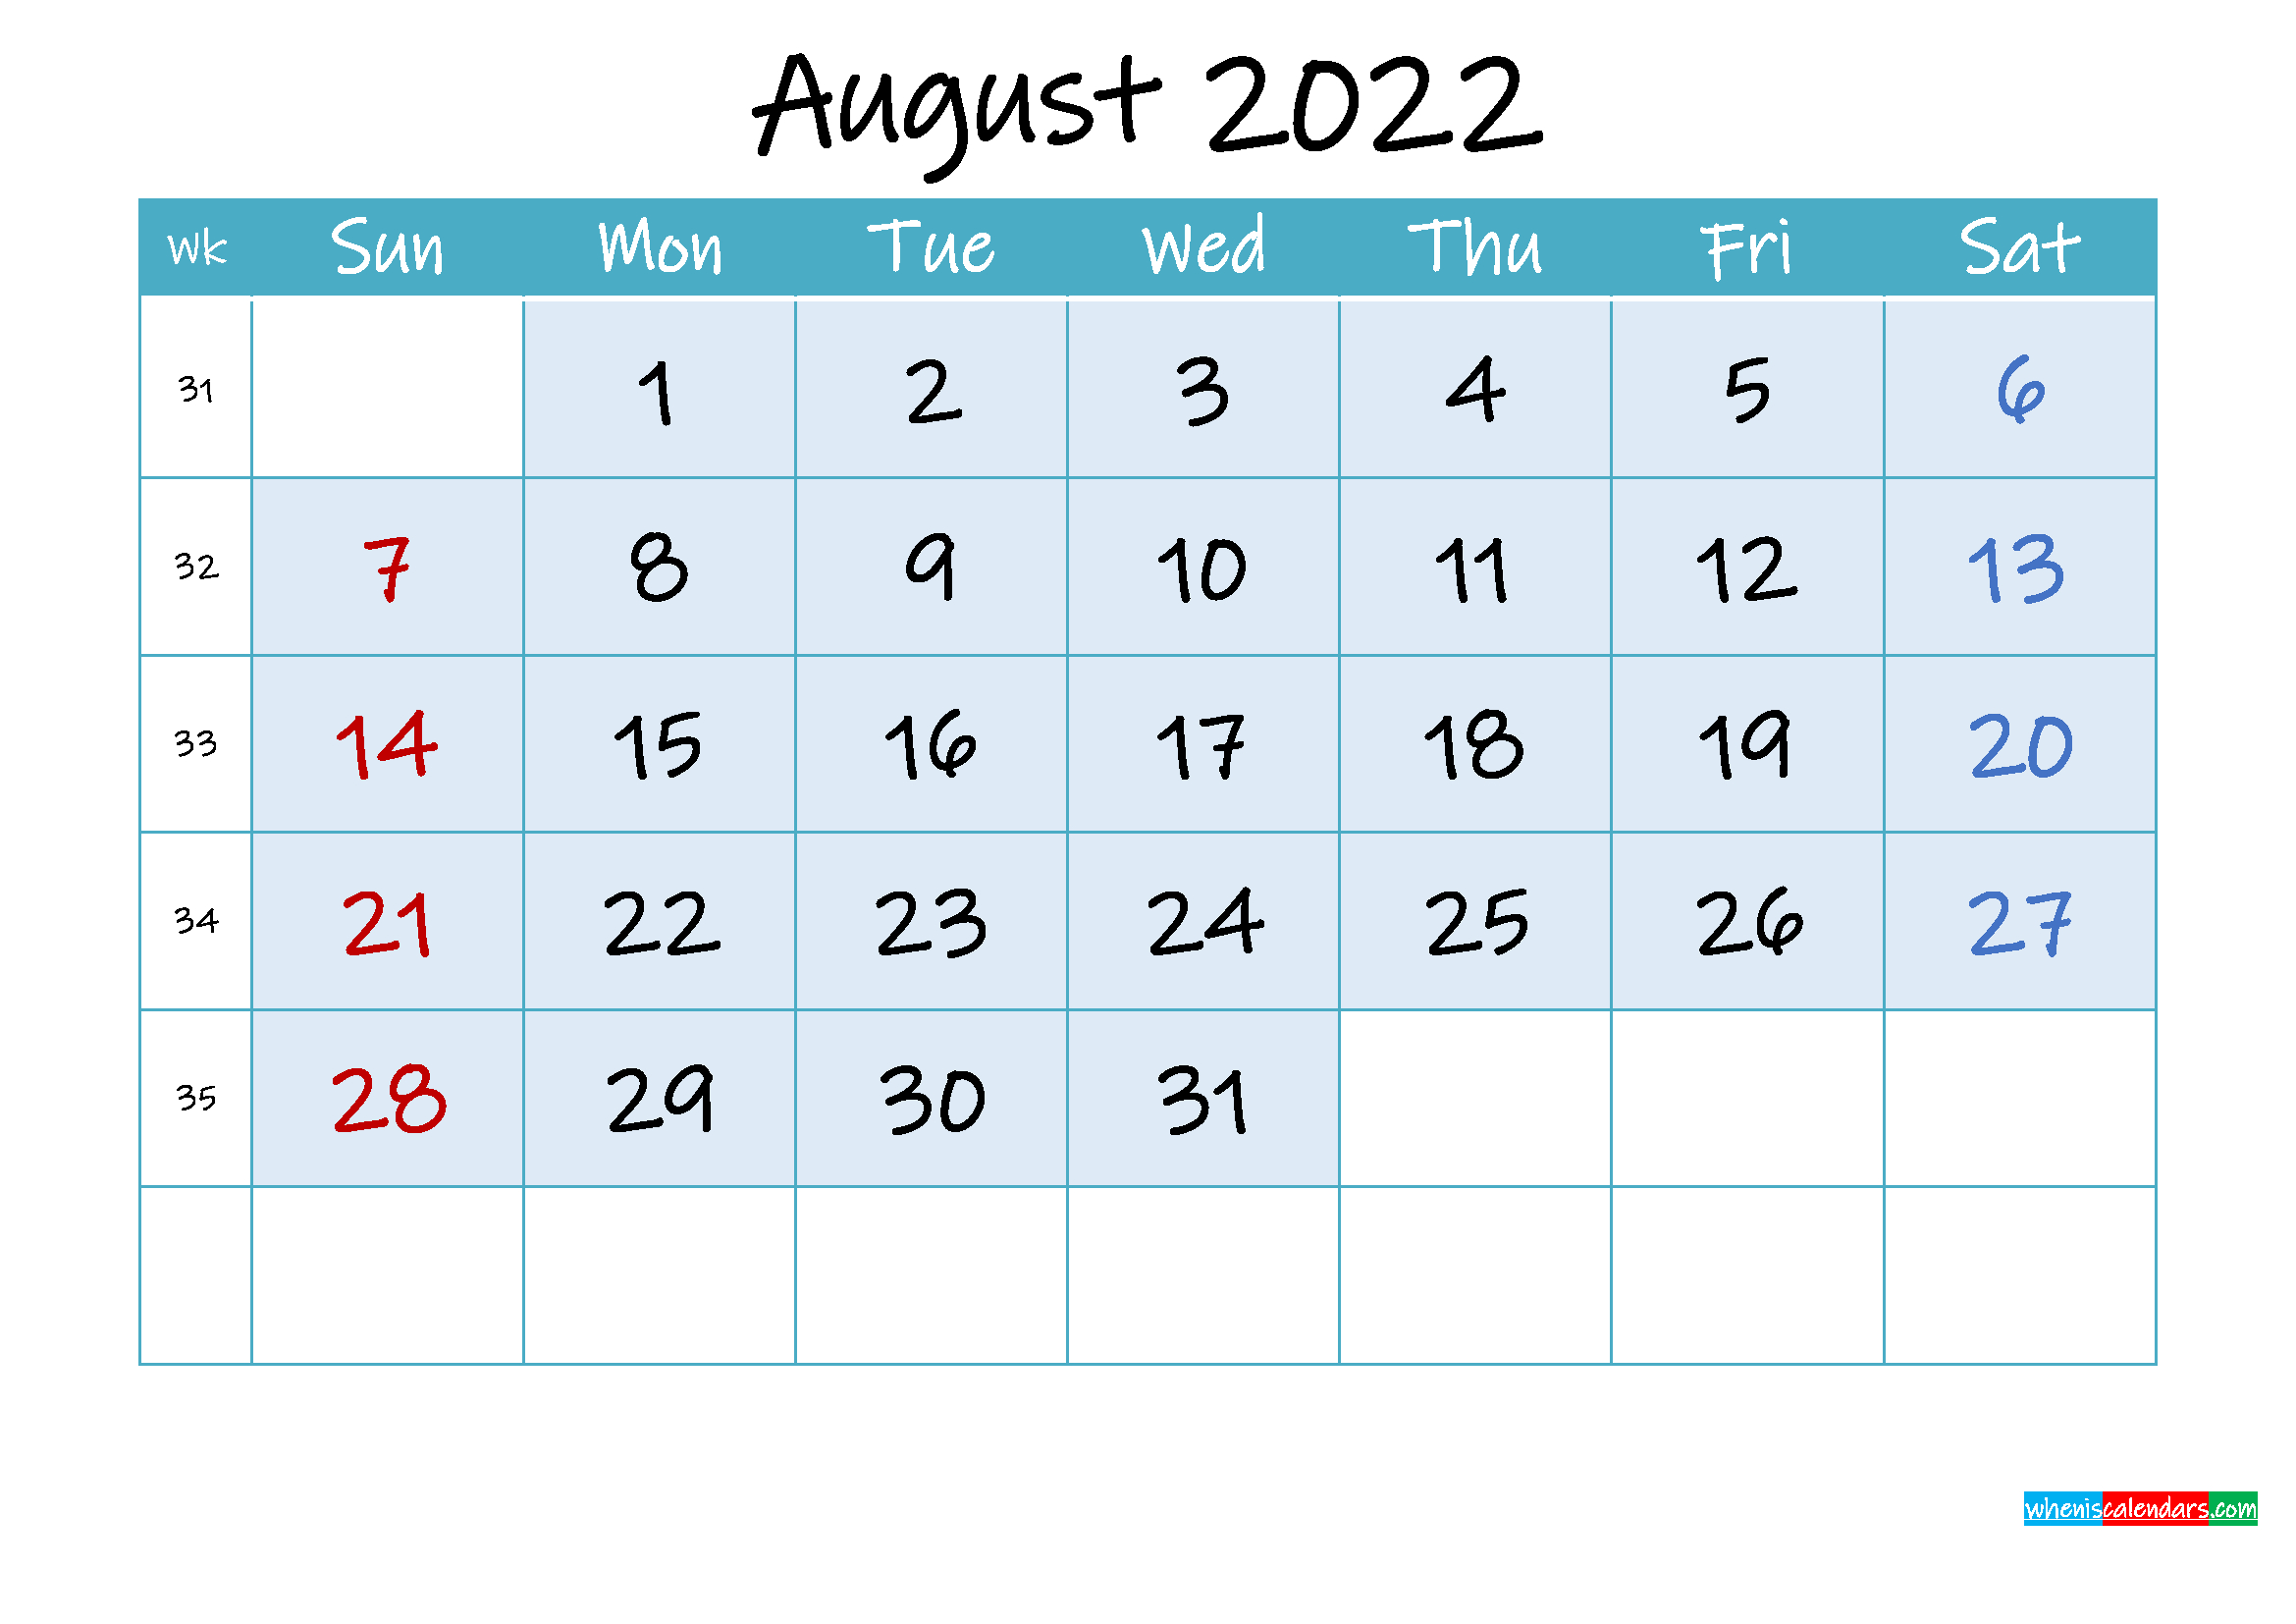 August 2022 Free Printable Calendar With Holidays  Printable Calendar 2022 August